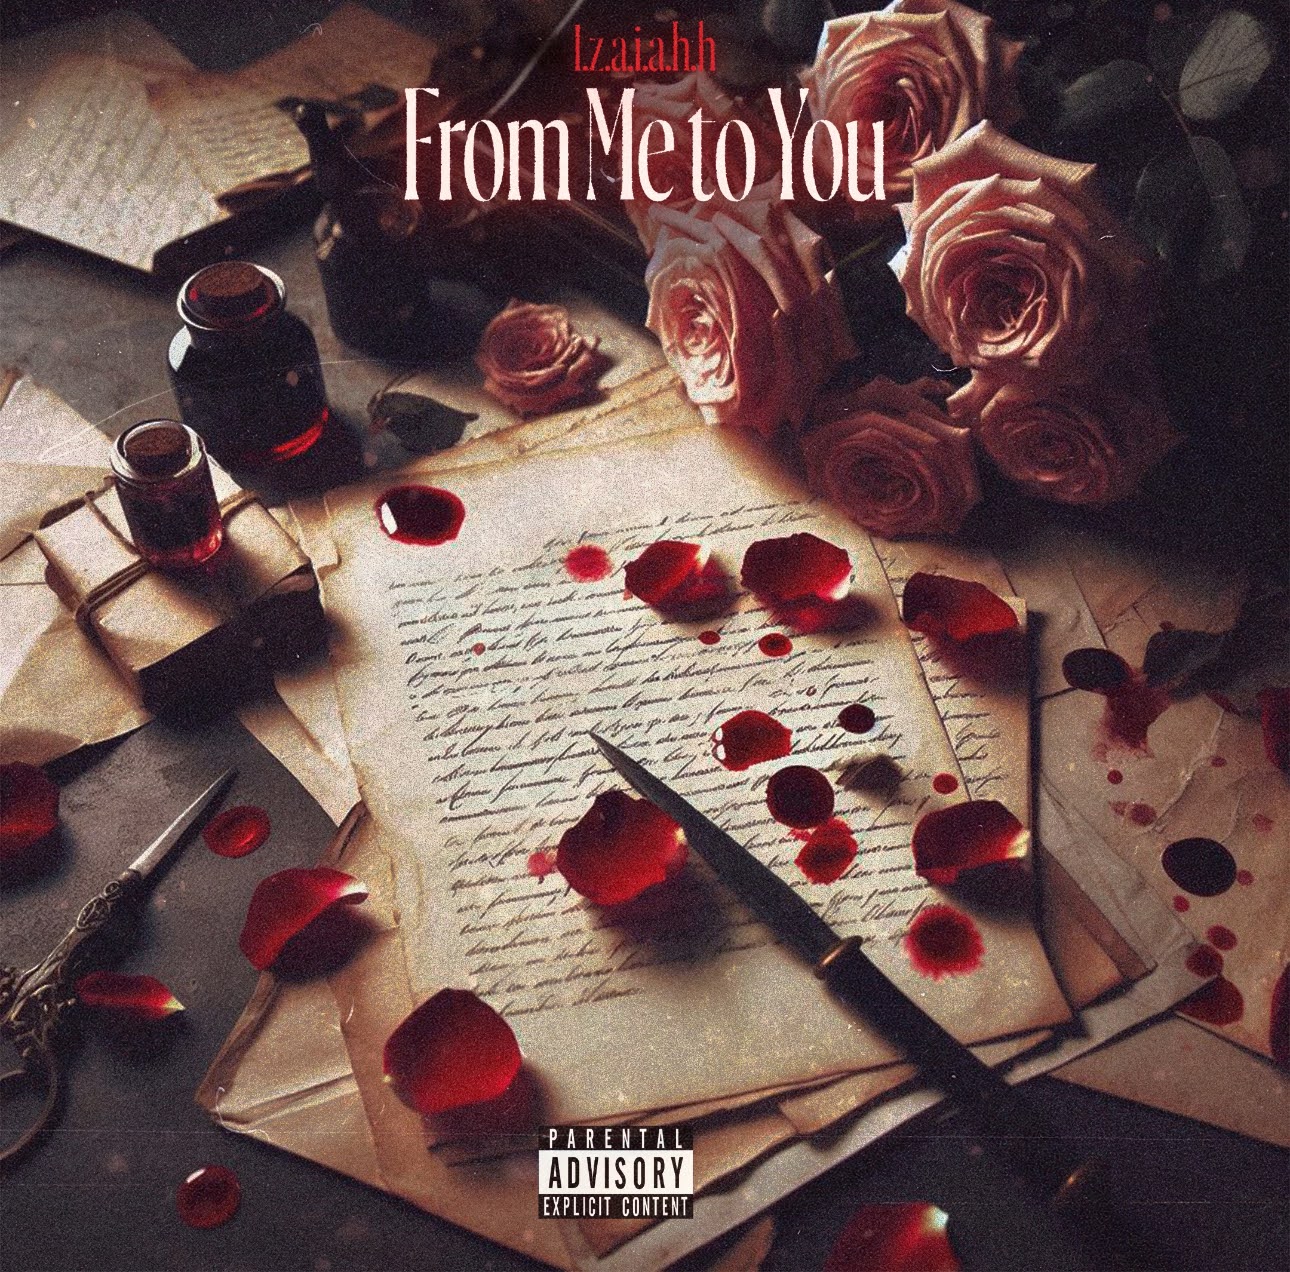 From the Heart: I.za.ia.hh’s Upcoming Project, ‘From Me to You’